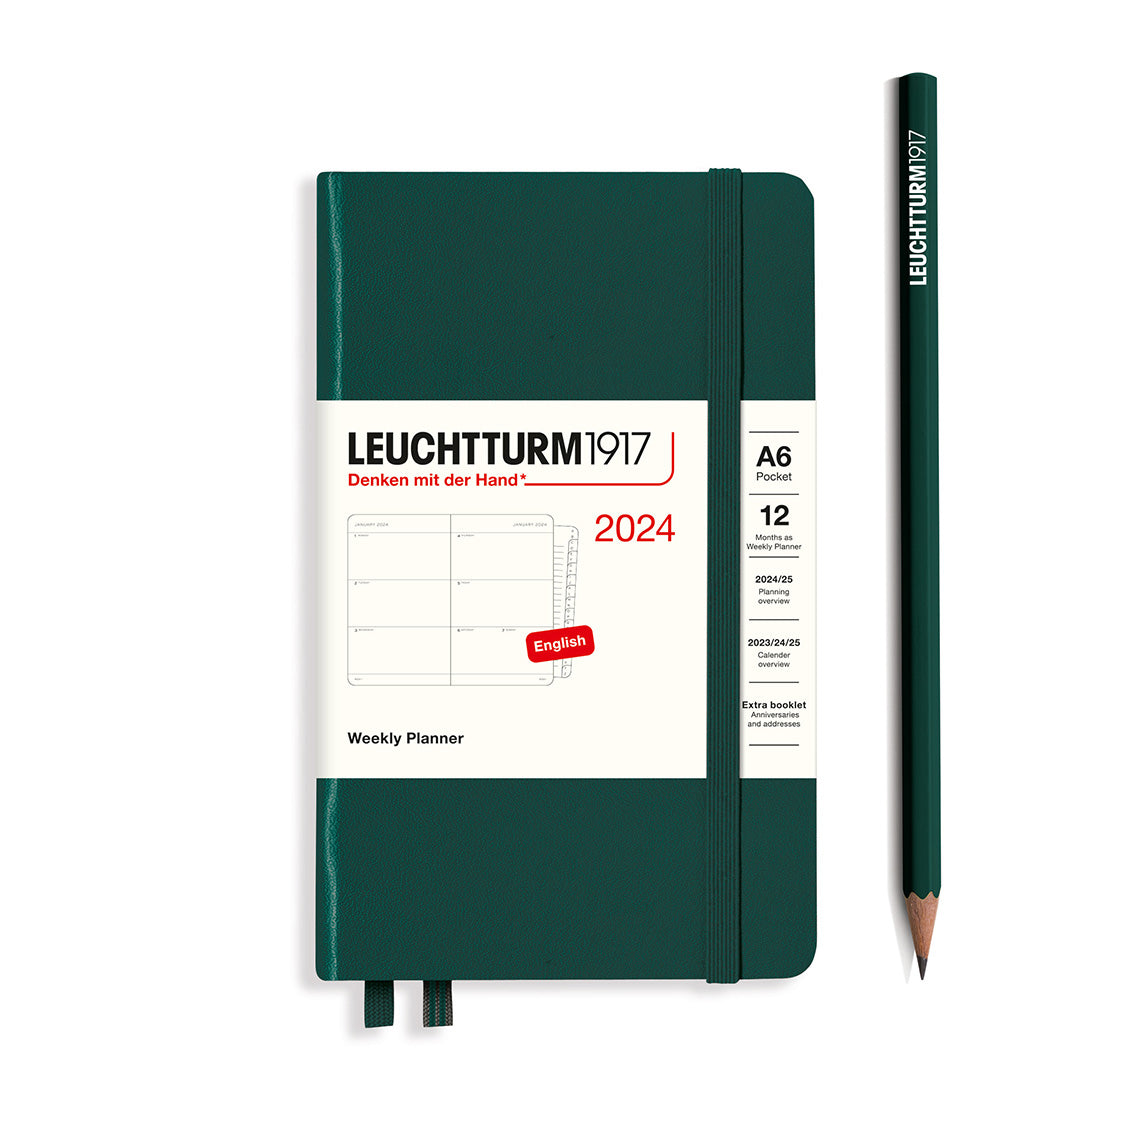 An image of a dark green planner with a dark green elastic band holding it together and a cream paper wrap around the middle stating the business name Leuchtturm1917, that it is for the year 2024, it is a weekly planner, is A6 in size and an English language version. It has an image on the wrap showing the inside layout which is a week spread across 2 pages. A dark green pencil is shown at the side of the planner.